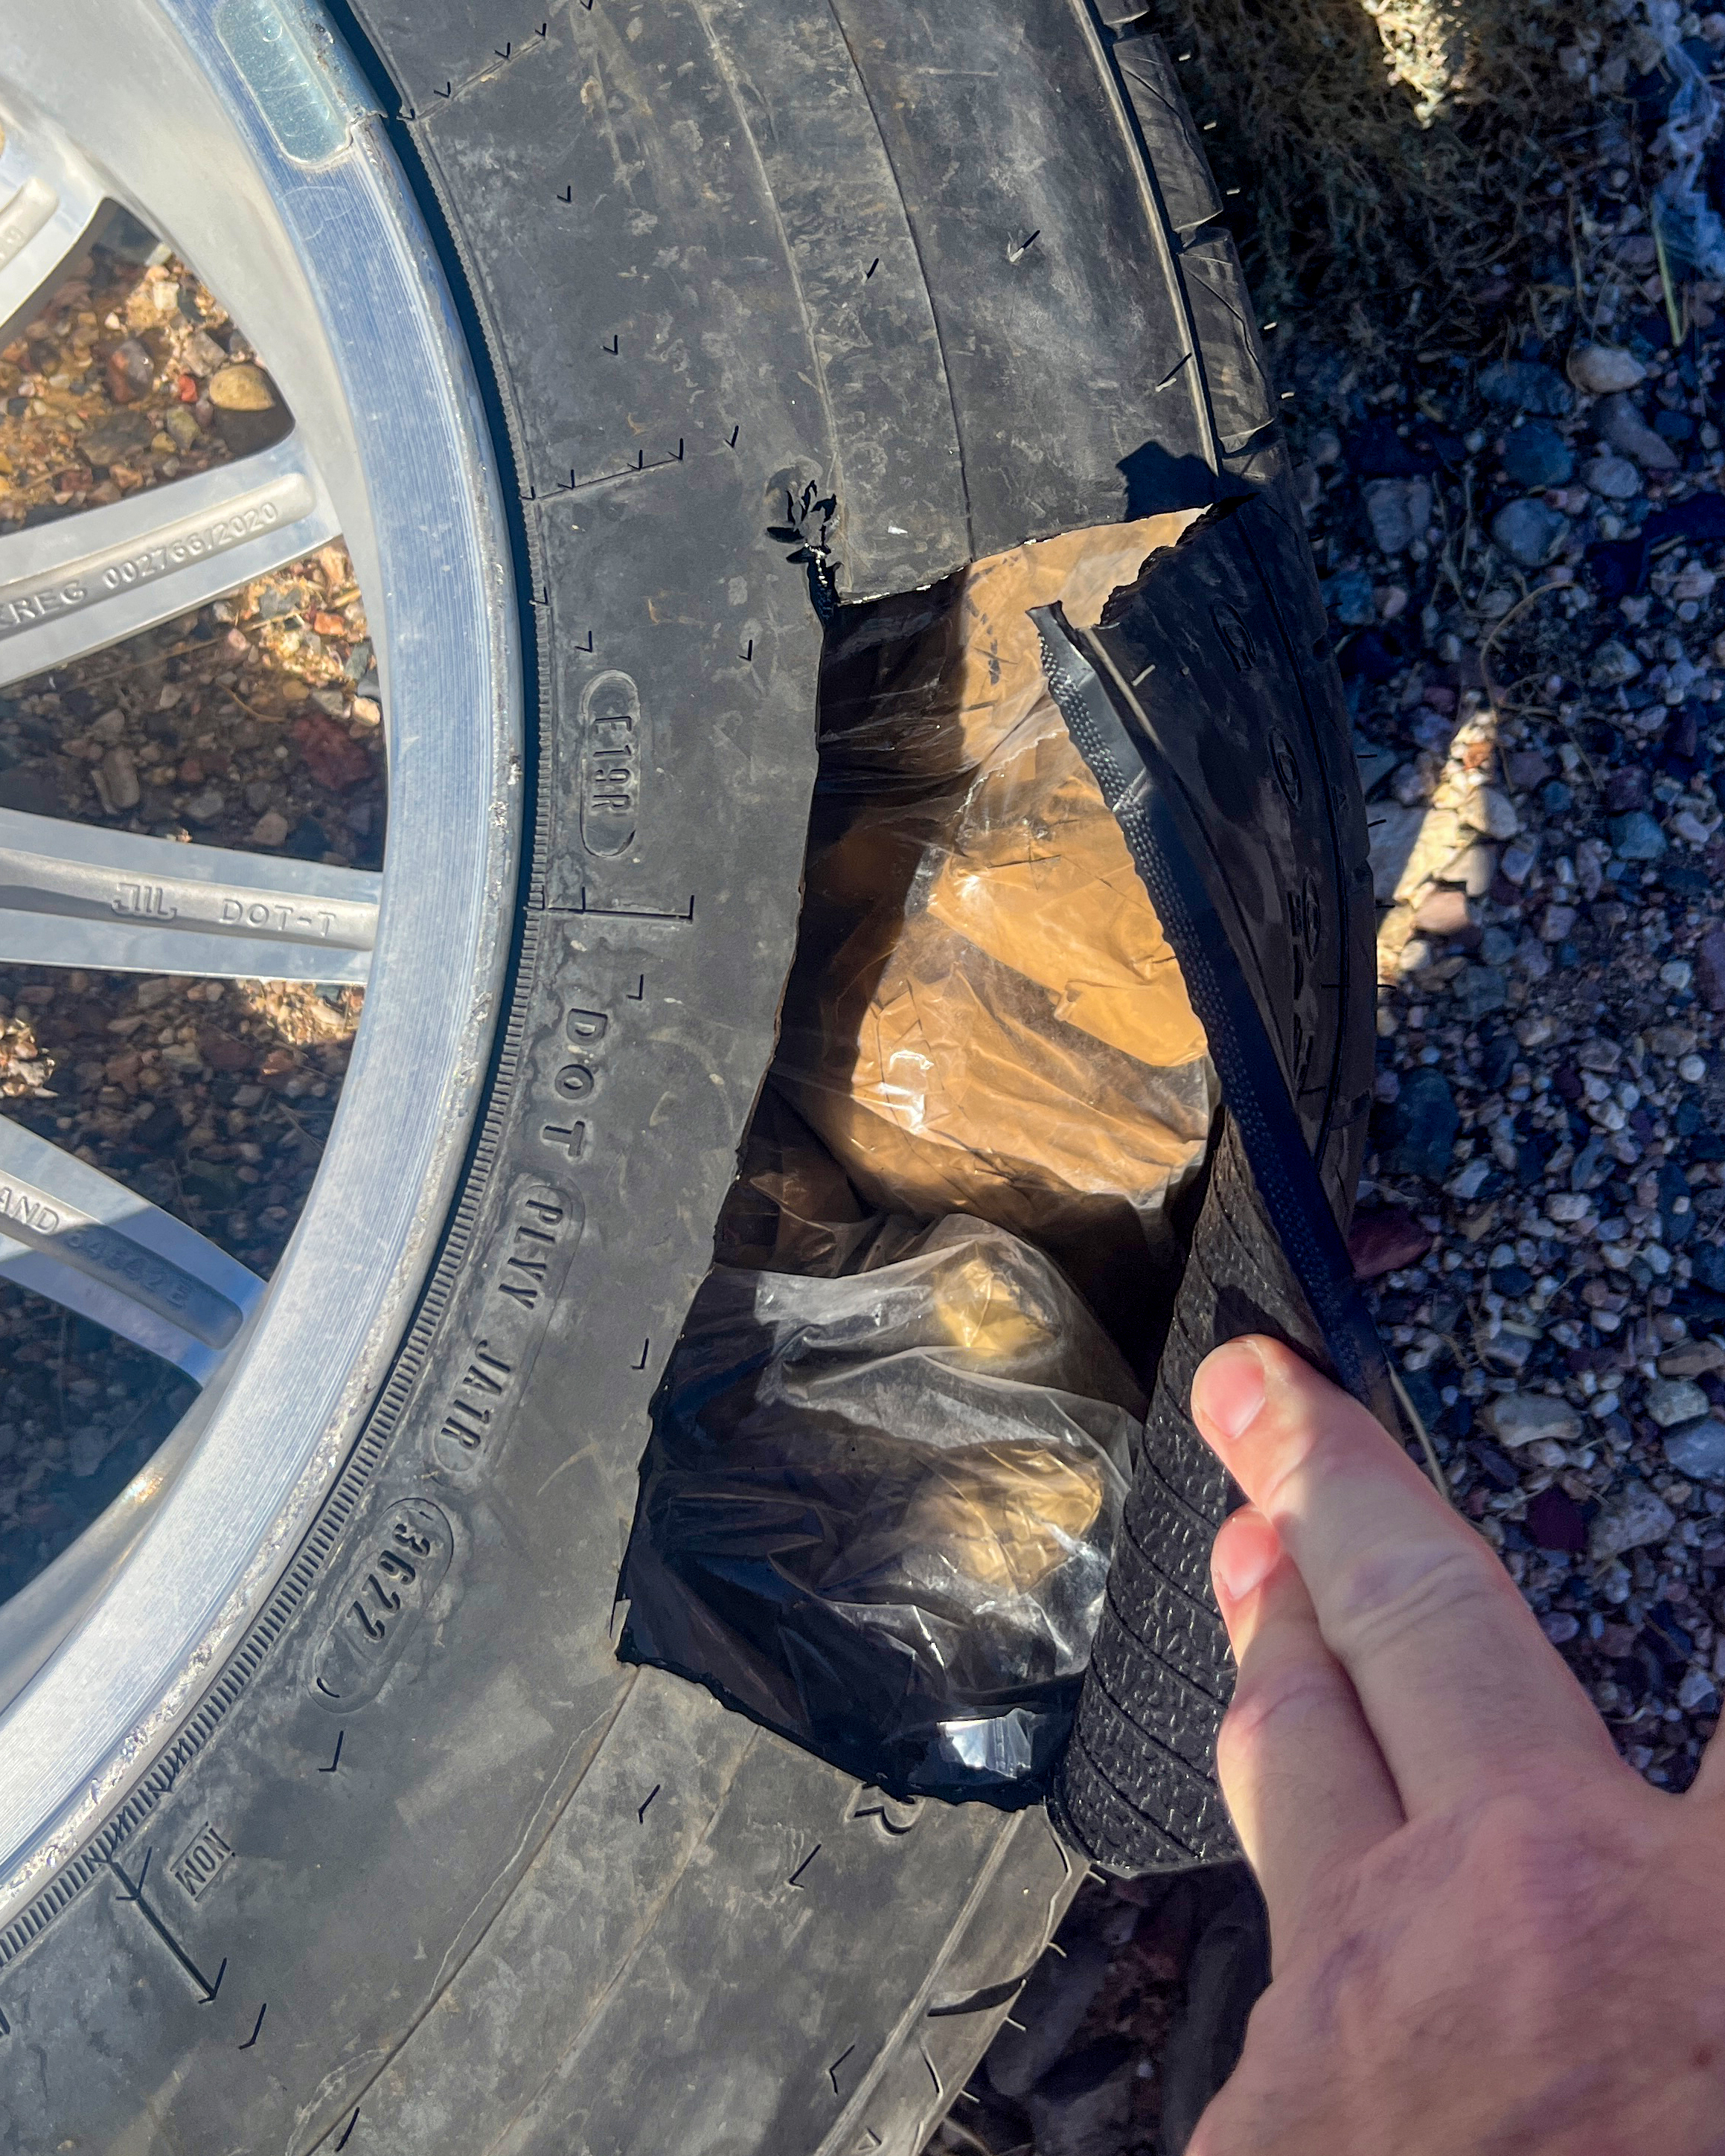 Plastic wrapped bundles are visible in a spare tire that's been cut open